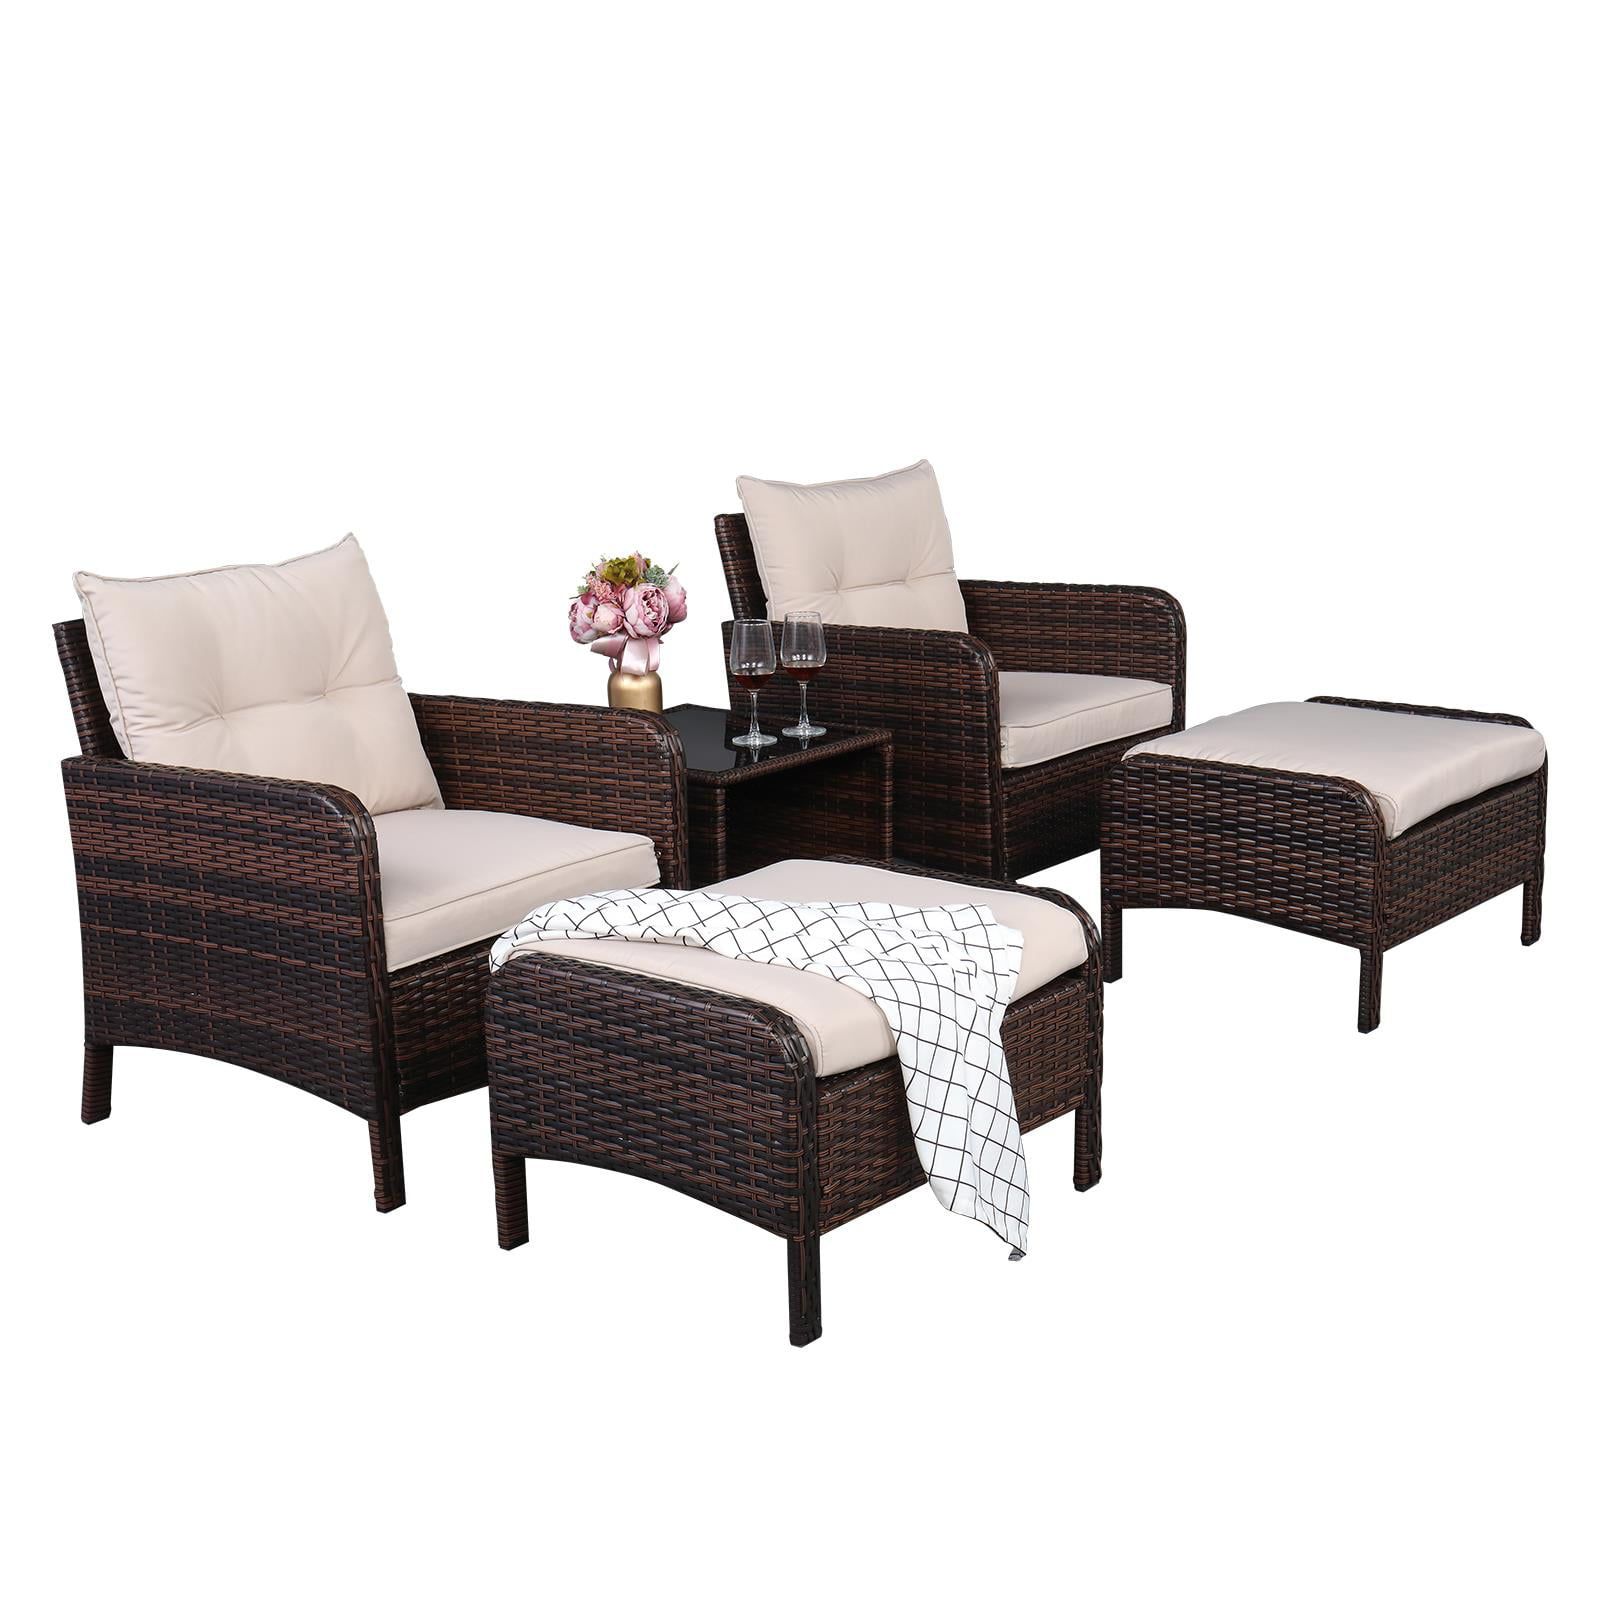 Featured Photo of 15 Photos Side Table Iron Frame Patio Furniture Set